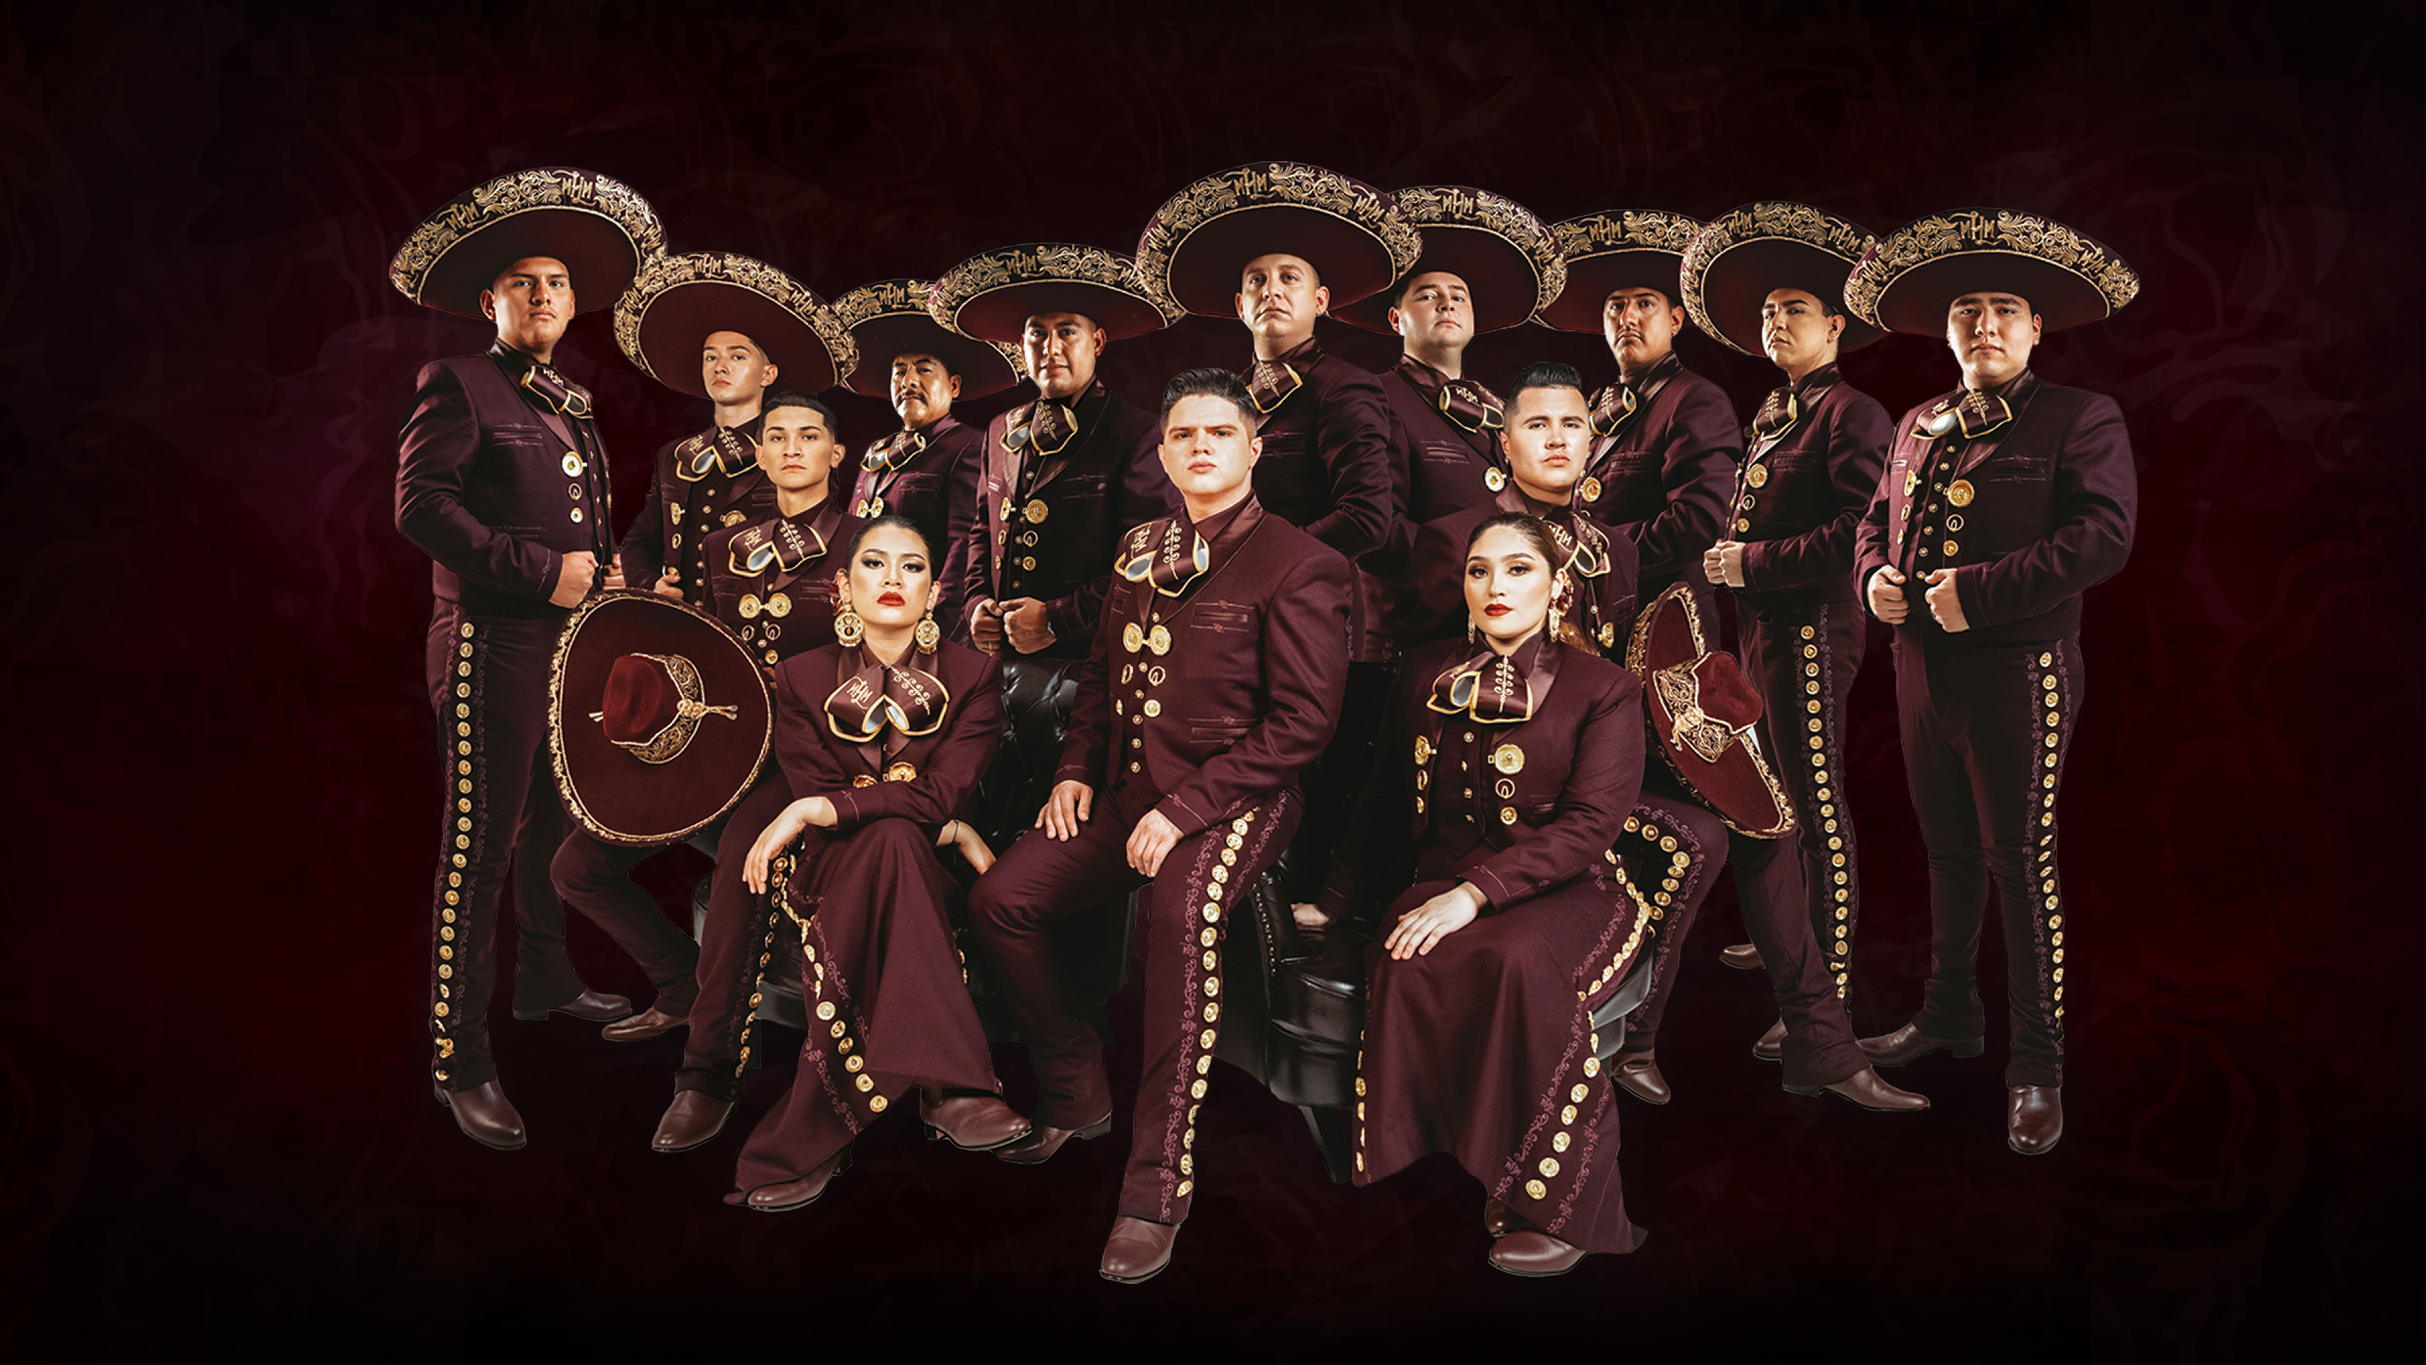 A mariachi band in traditional attire posing confidently against a dark red background.